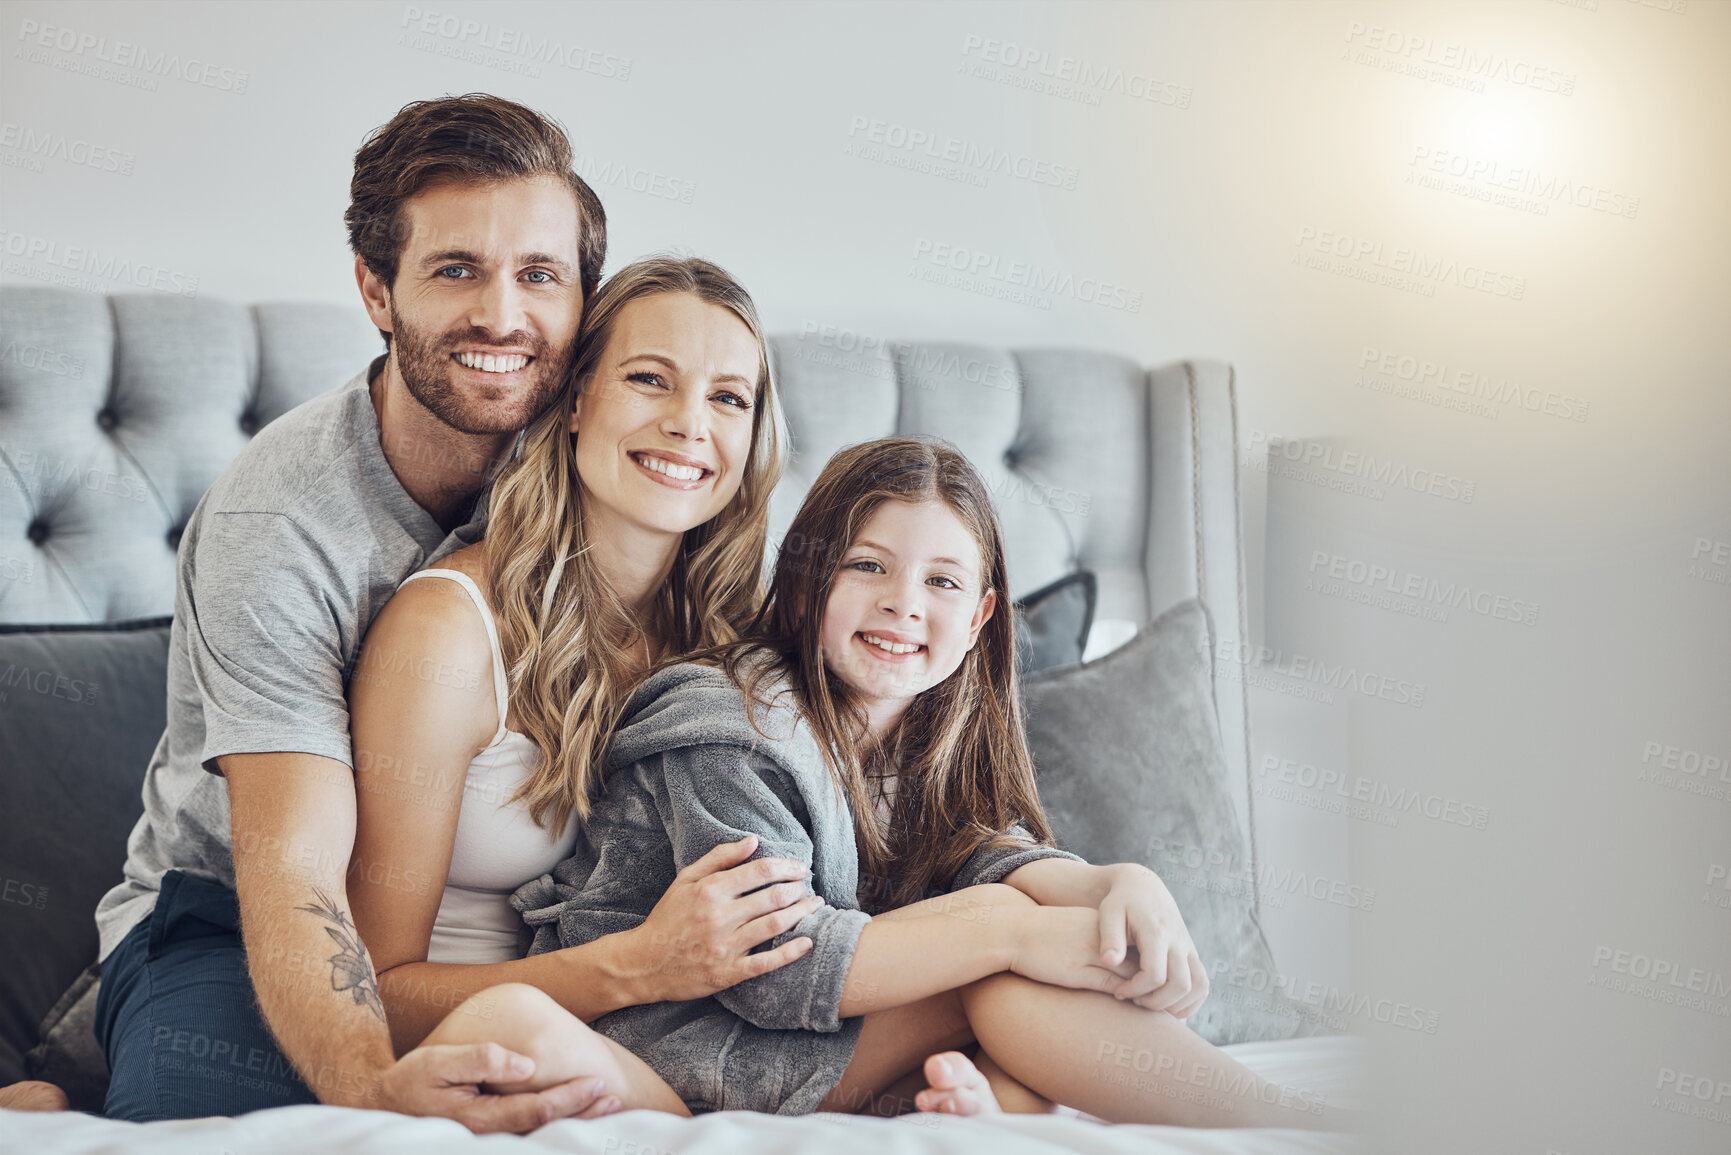 Buy stock photo Portrait, mother or father hugging a girl to relax as a happy family in bedroom bonding in Australia with love or care. Morning, embracing or parents smile with kid enjoying quality time on holiday